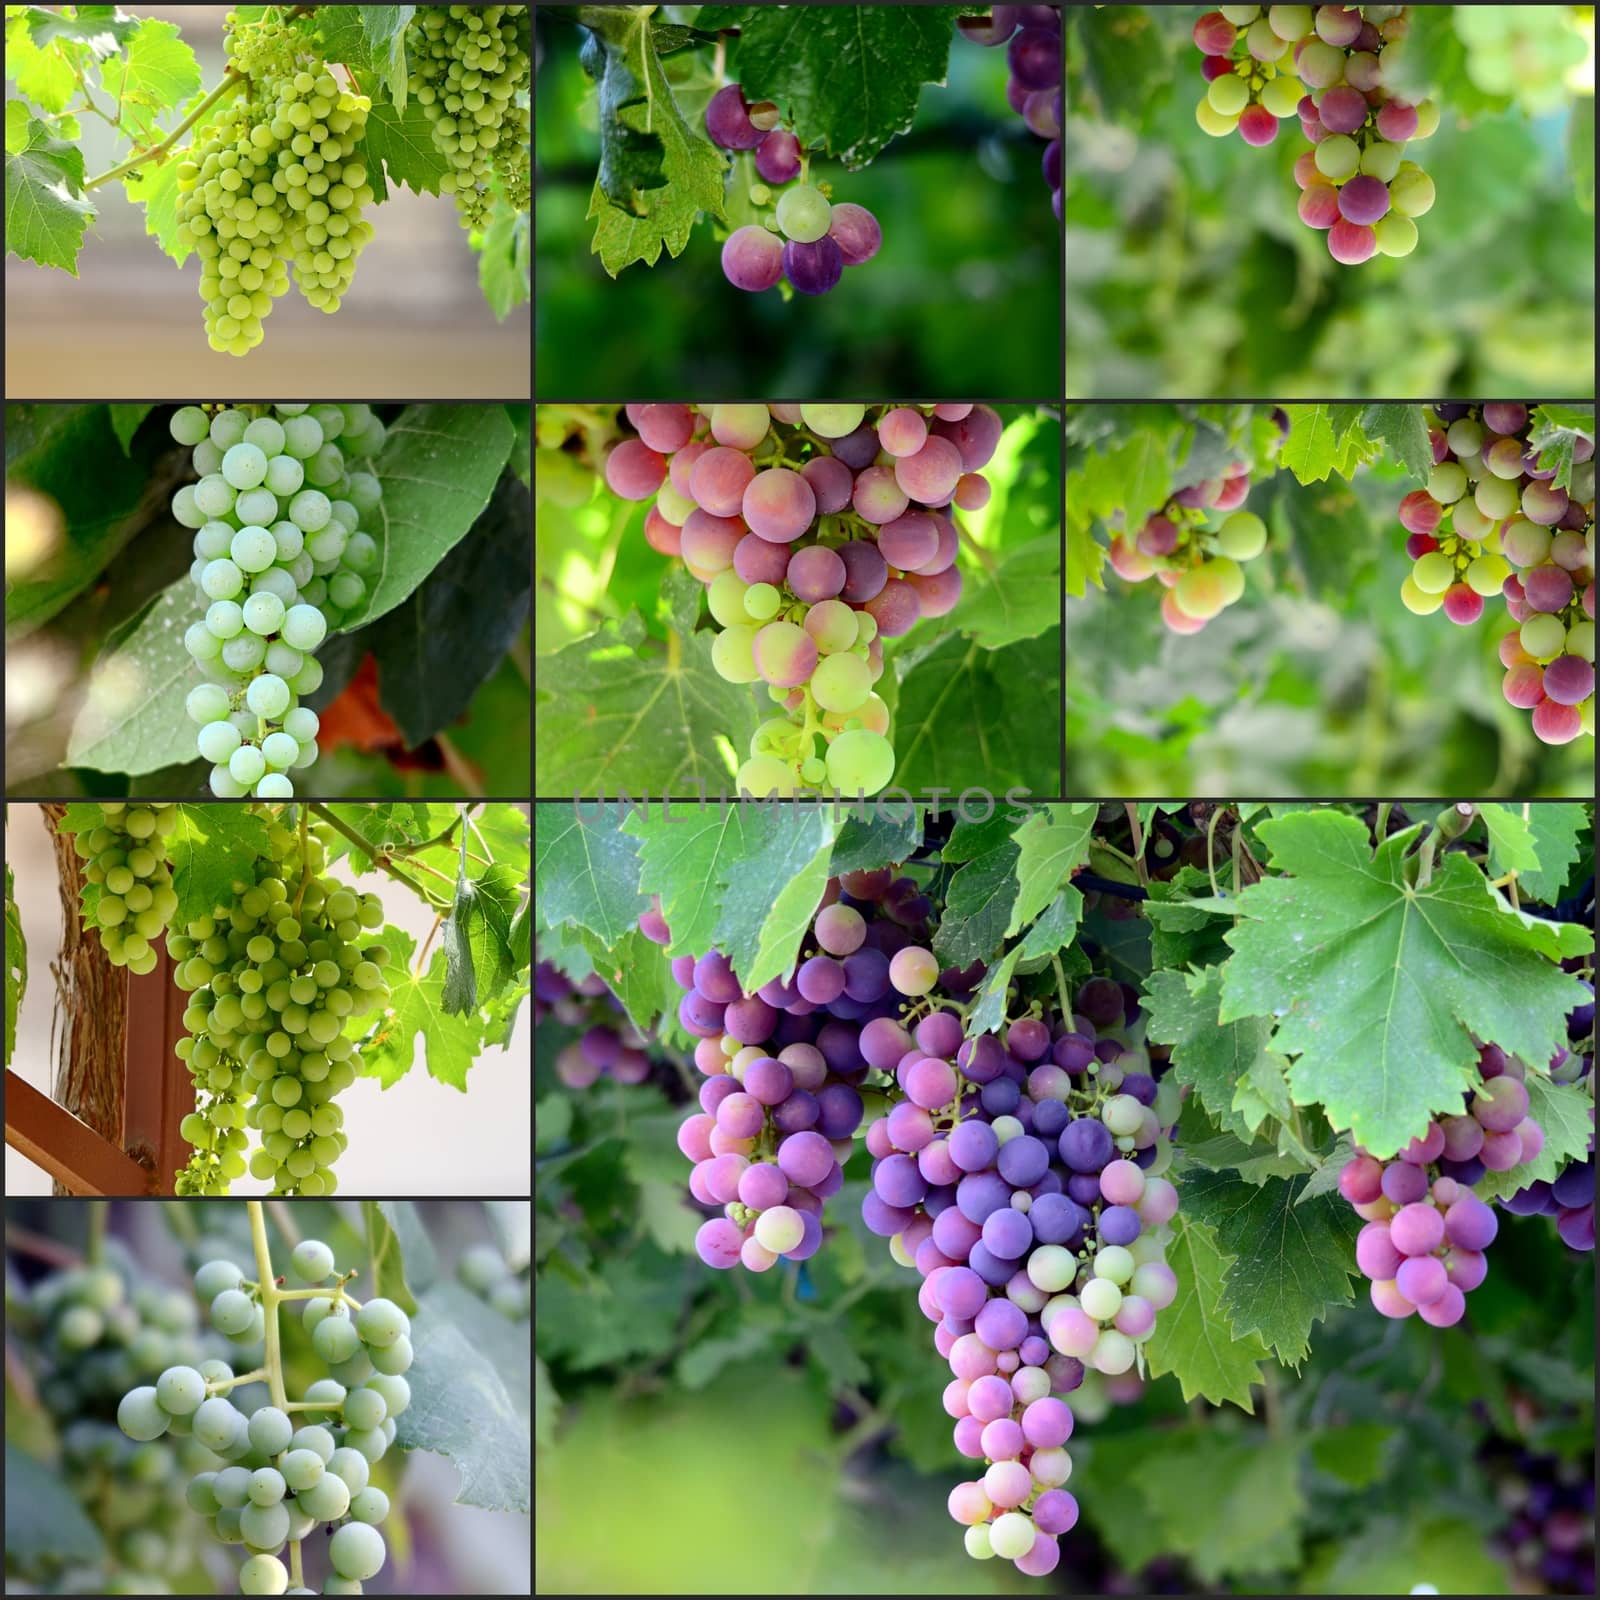  Picture of a Grapes on the Vine just before harvest